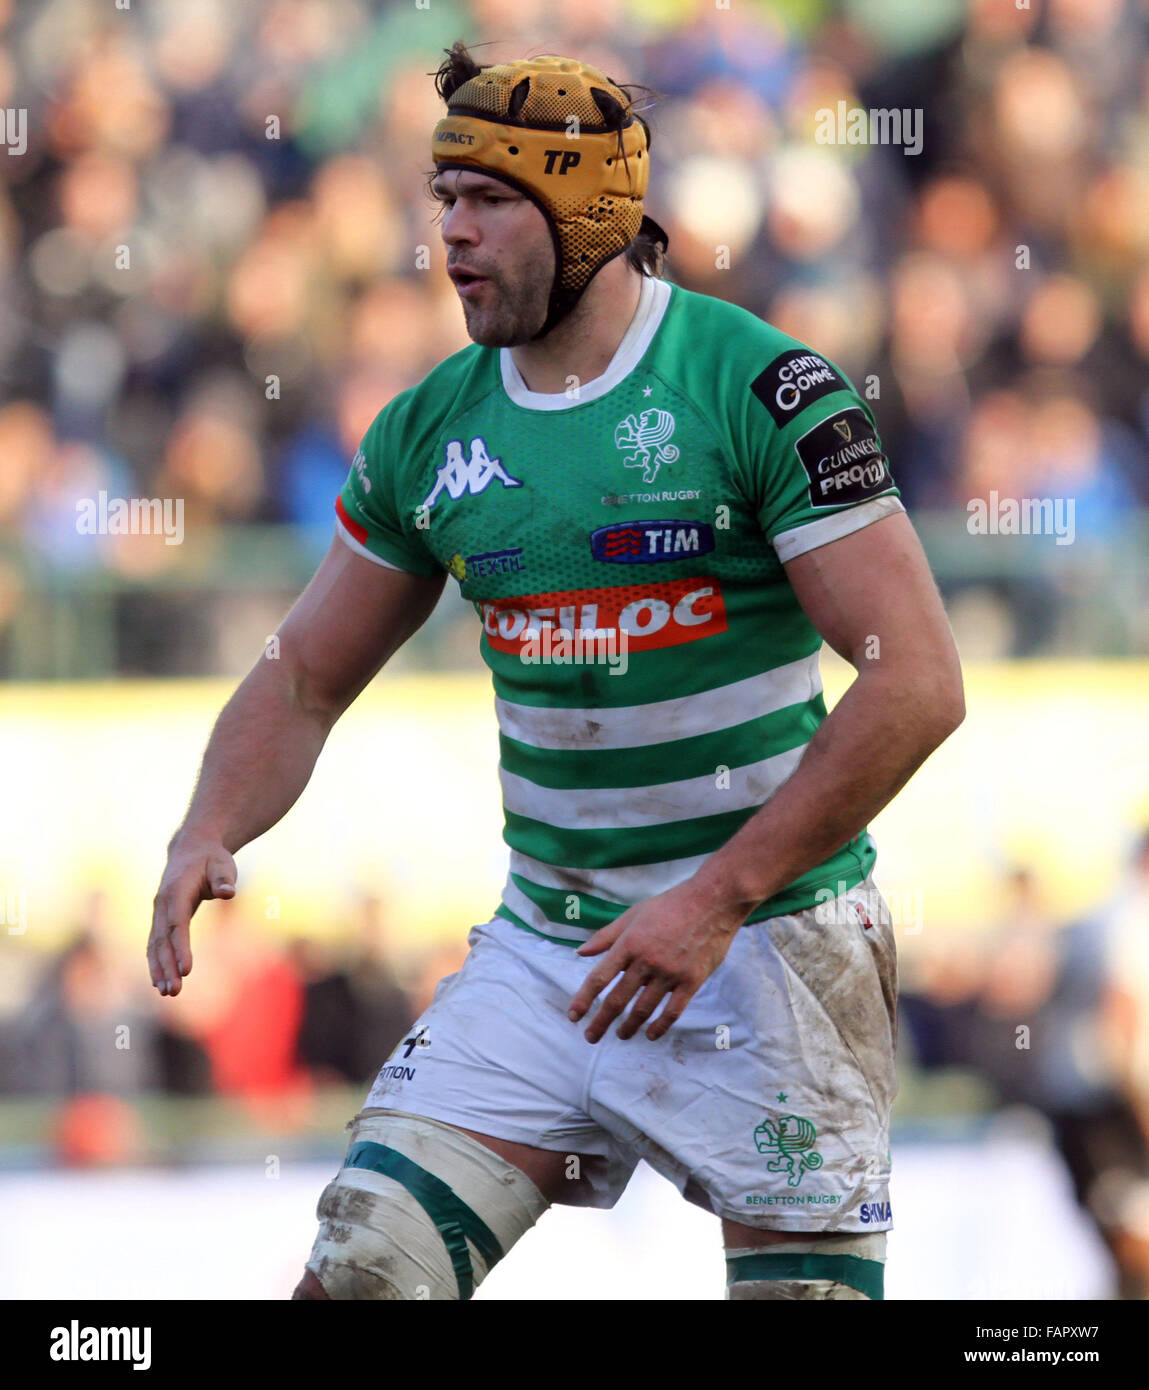 ITALY, Treviso: Benetton Treviso's player Tom Palmer looks during Rugby Guinness Pro12 match  between Benetton Treviso and Zebre Rugby on 3rd January, 2016 in Treviso Stock Photo